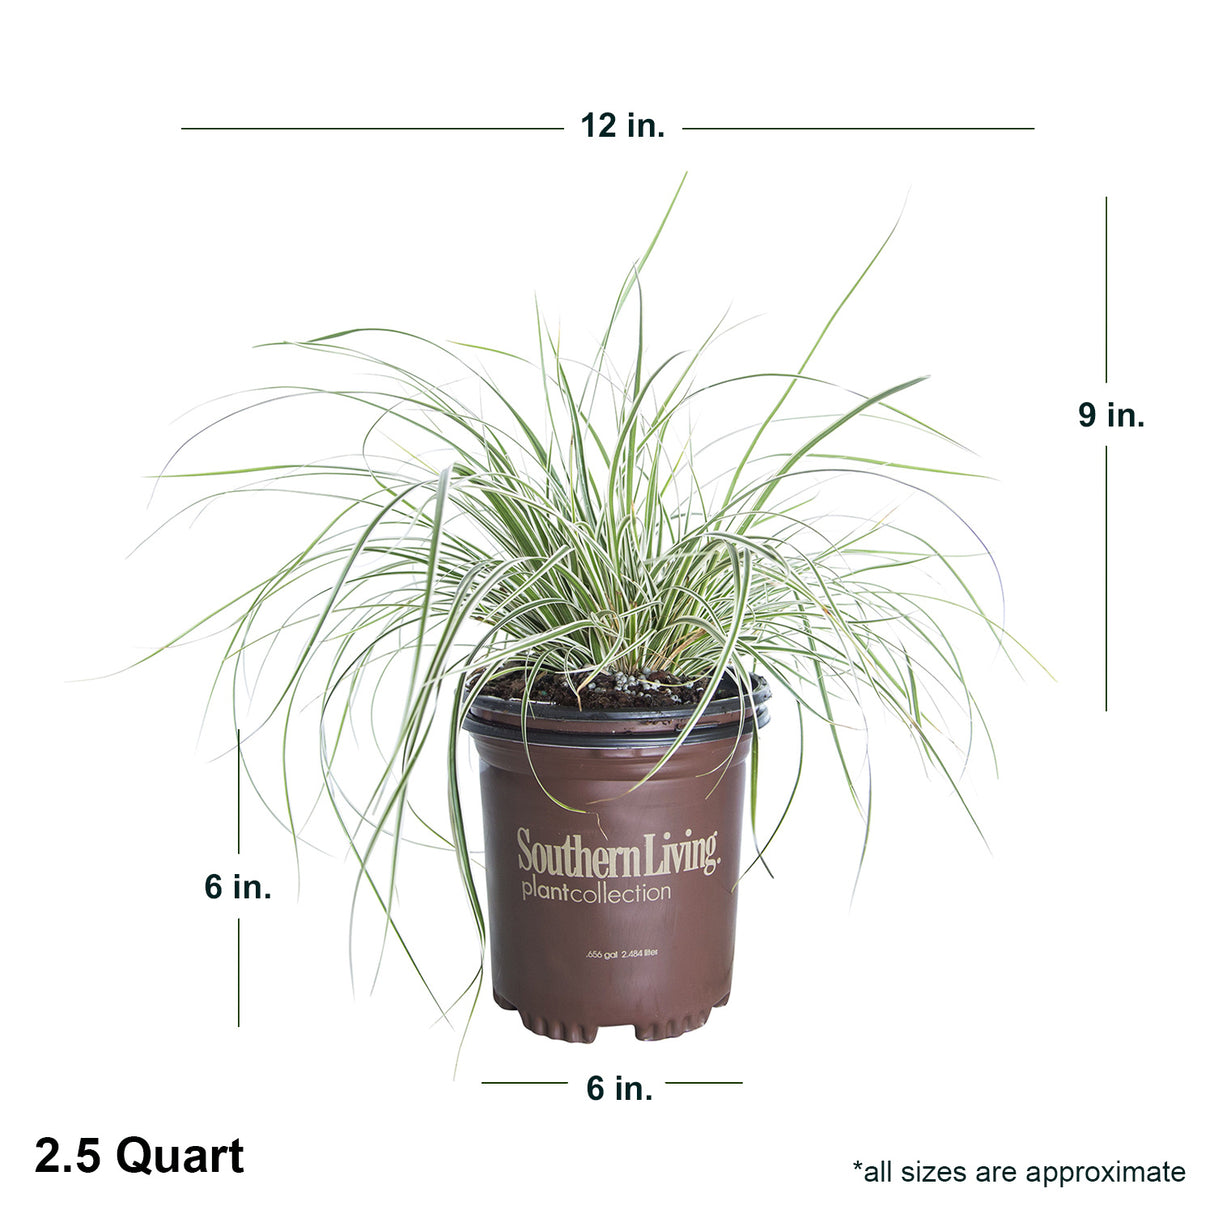 2.5 Quart Everest Carex in southern living container showing dimensions